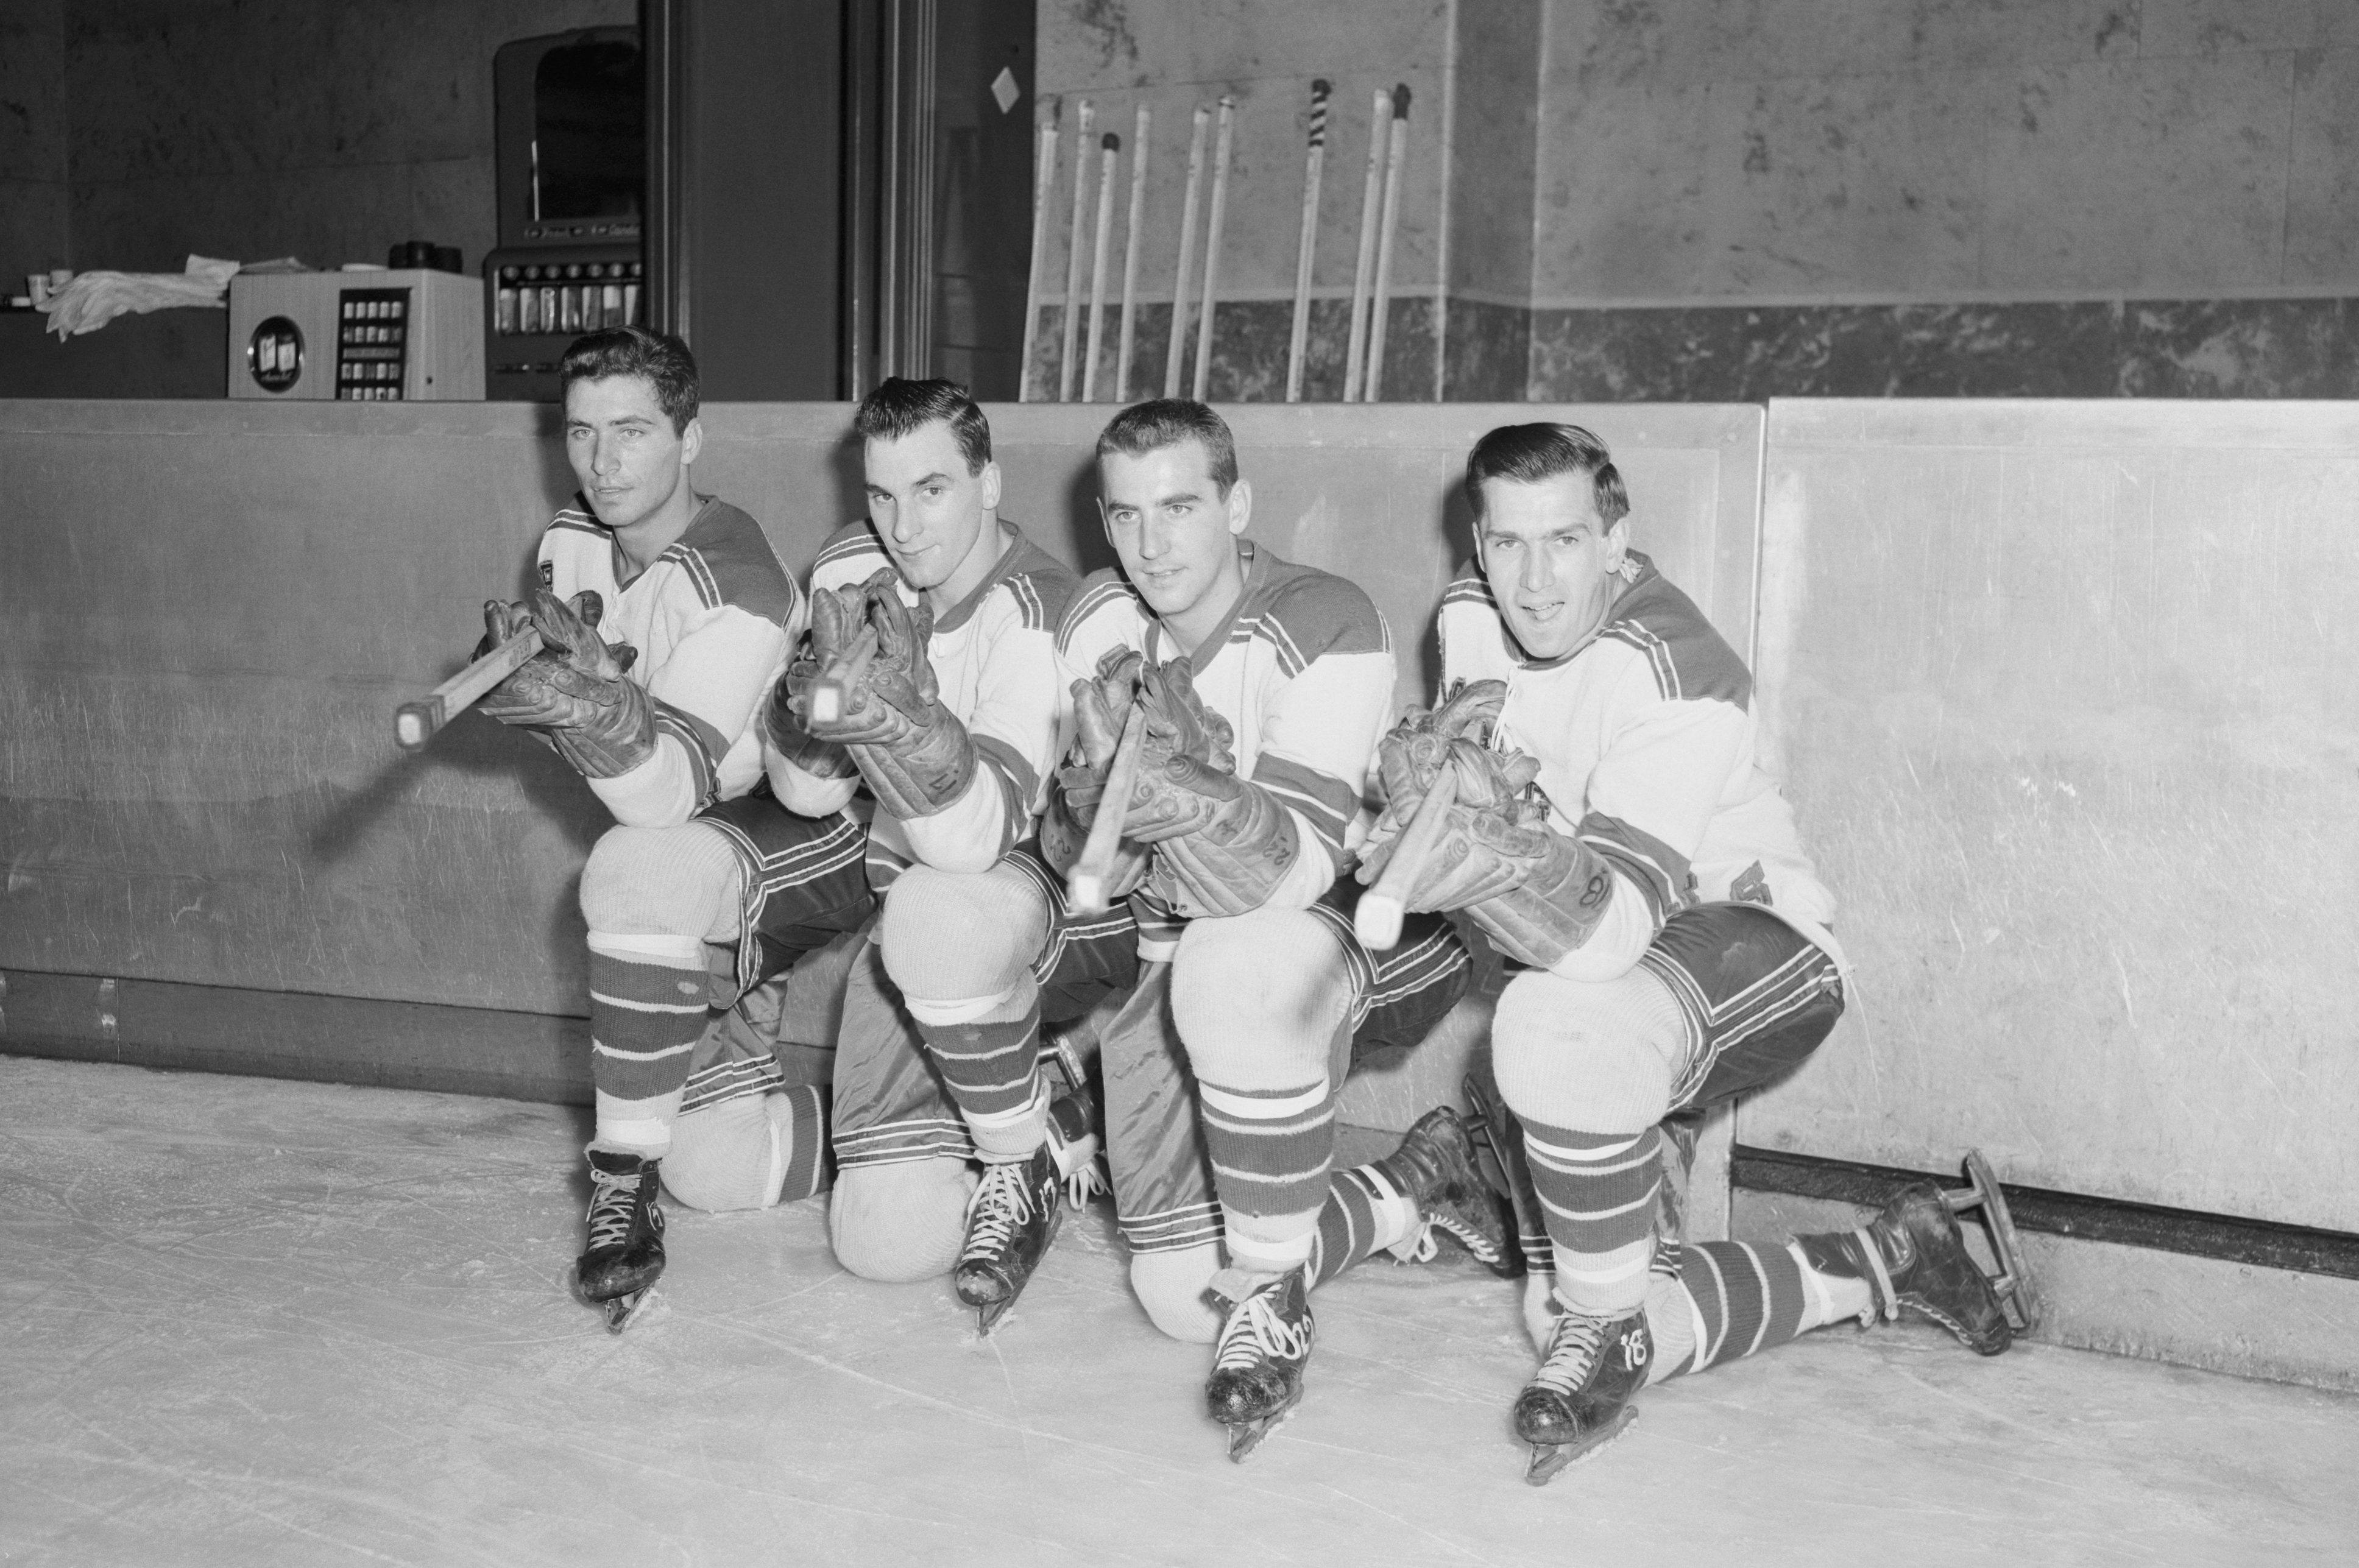 Here are the four sharpshooters of the New York Rangers who are expected to score 100 goals for the season as they paused during a workout at Madison Square Garden today. From left: Andy Bathgate, Dean Prentice, Danny Lewicki, and Wally Hergesheimer. The Rangers show every sign of going to town this year. The won their NHL opener for the first time in eight years at Chicago and licked the Detroit Red Wings for the first time since the 1953-54 season.